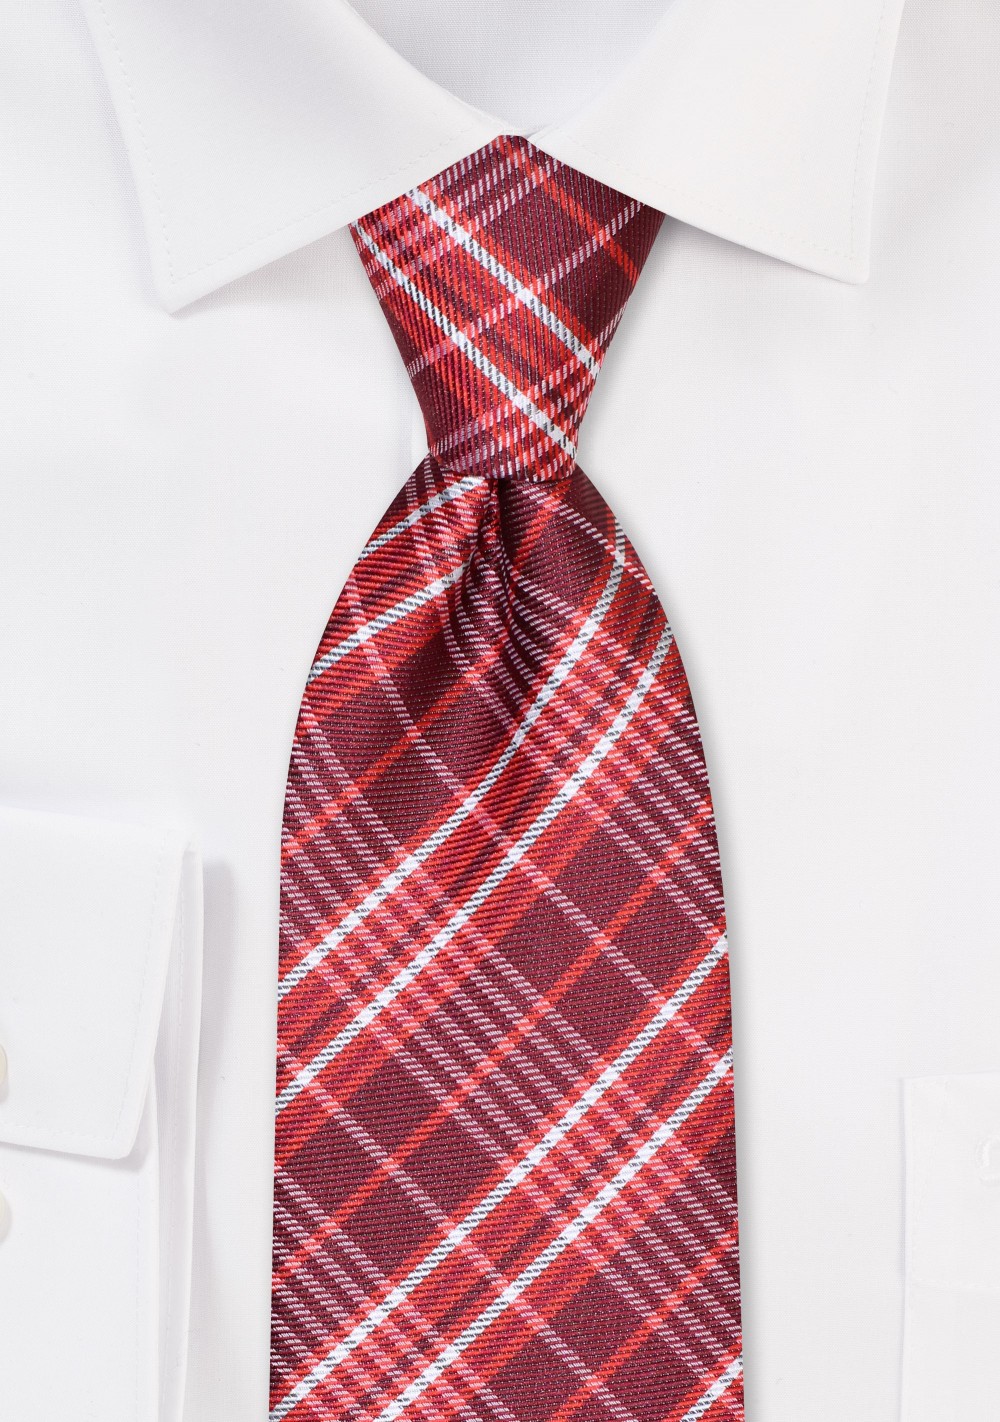 Trendy Tartan Mens Tie in Red and White